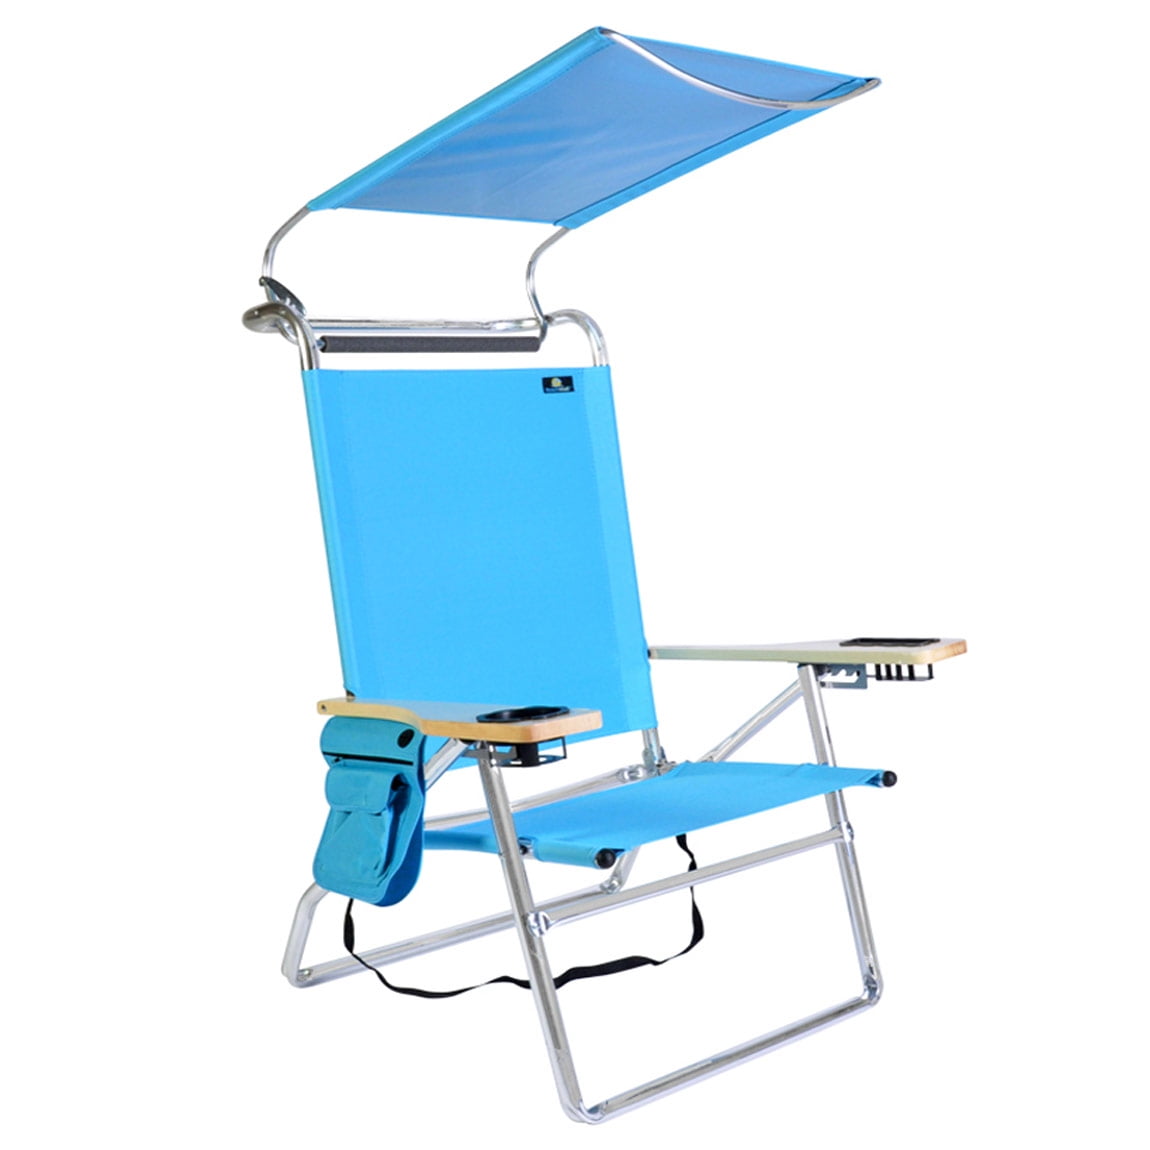 250 lbs Capacity Deluxe Lightweight 4 Position High Seat Aluminum Beach Chair with Canopy Storage Pouch Cup Holder 